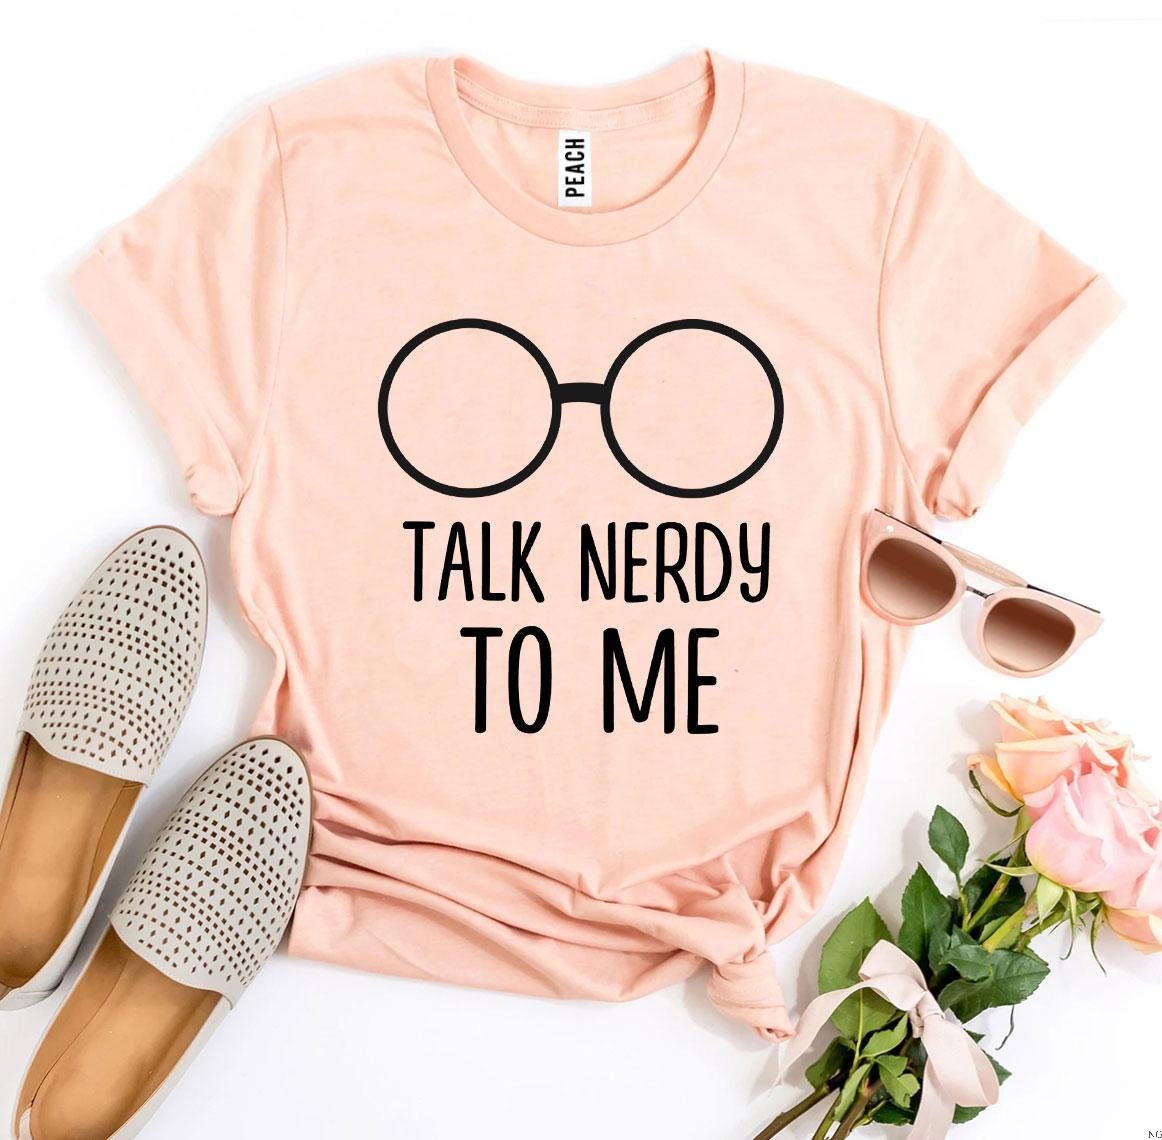 How to Host a Nerdy Tea Party – Some Nerd Girl